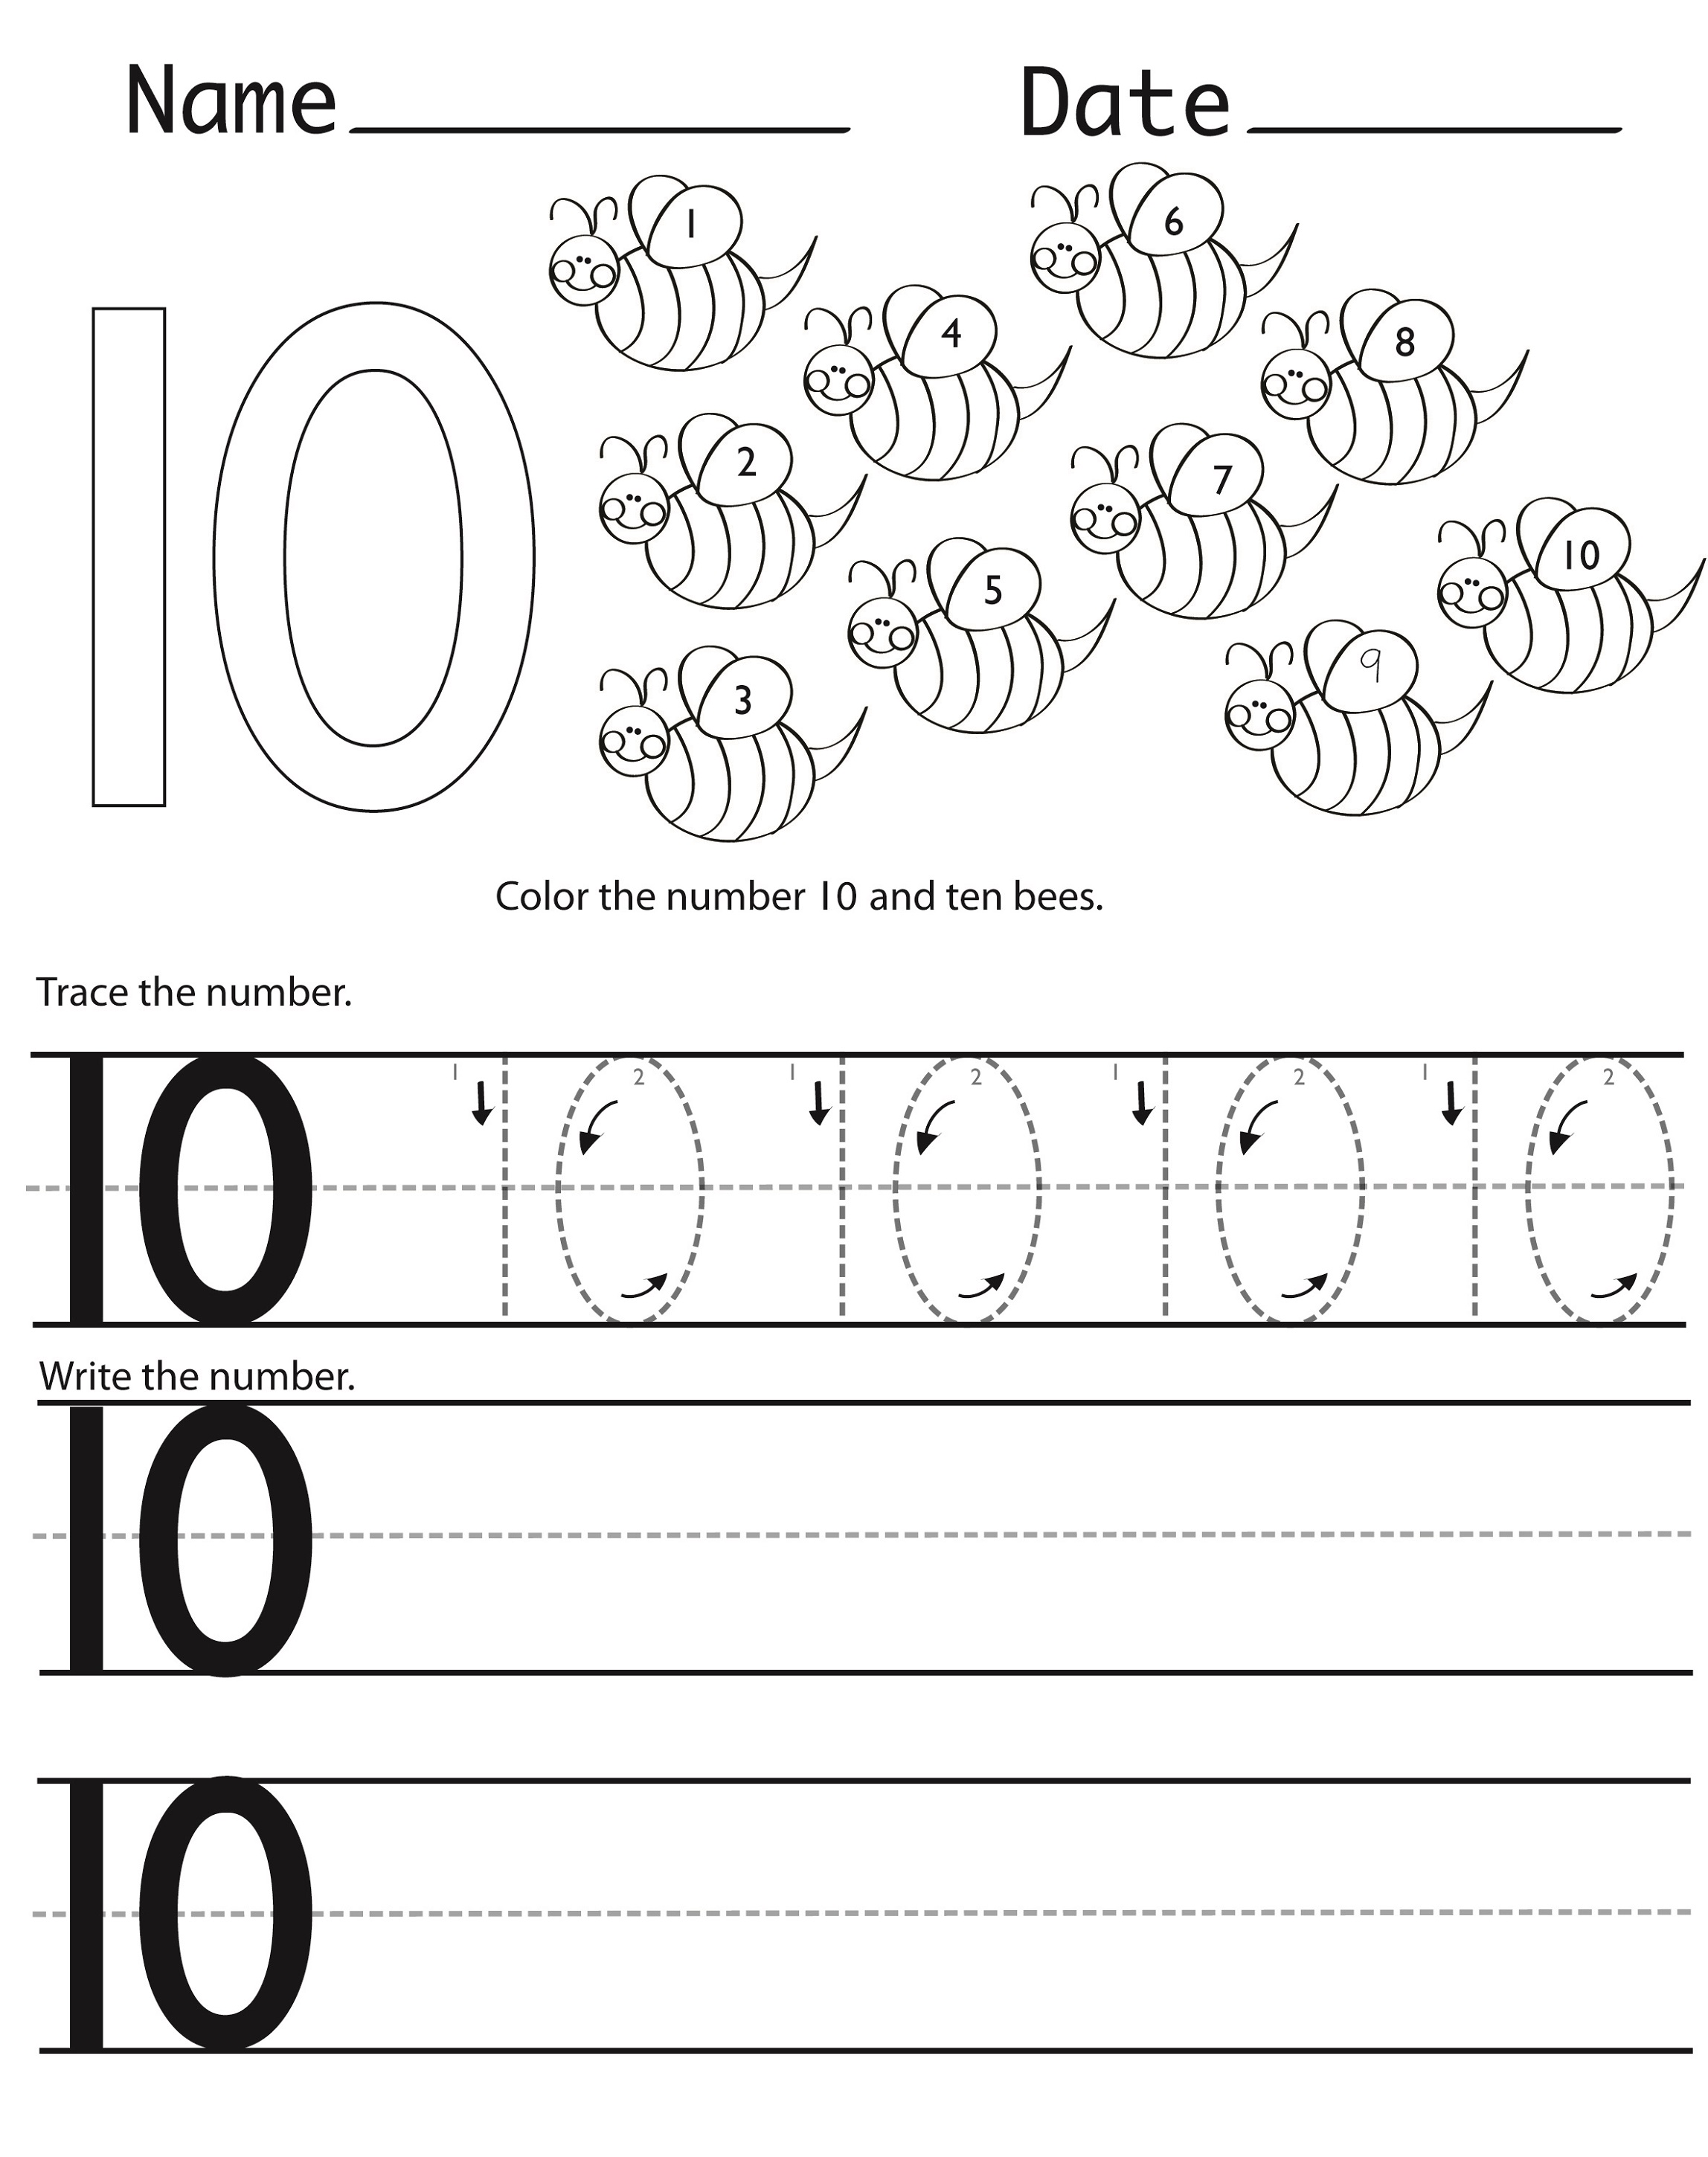 writing-one-to-ten-writing-numbers-1-10-in-words-worksheets-let-s-get-started-with